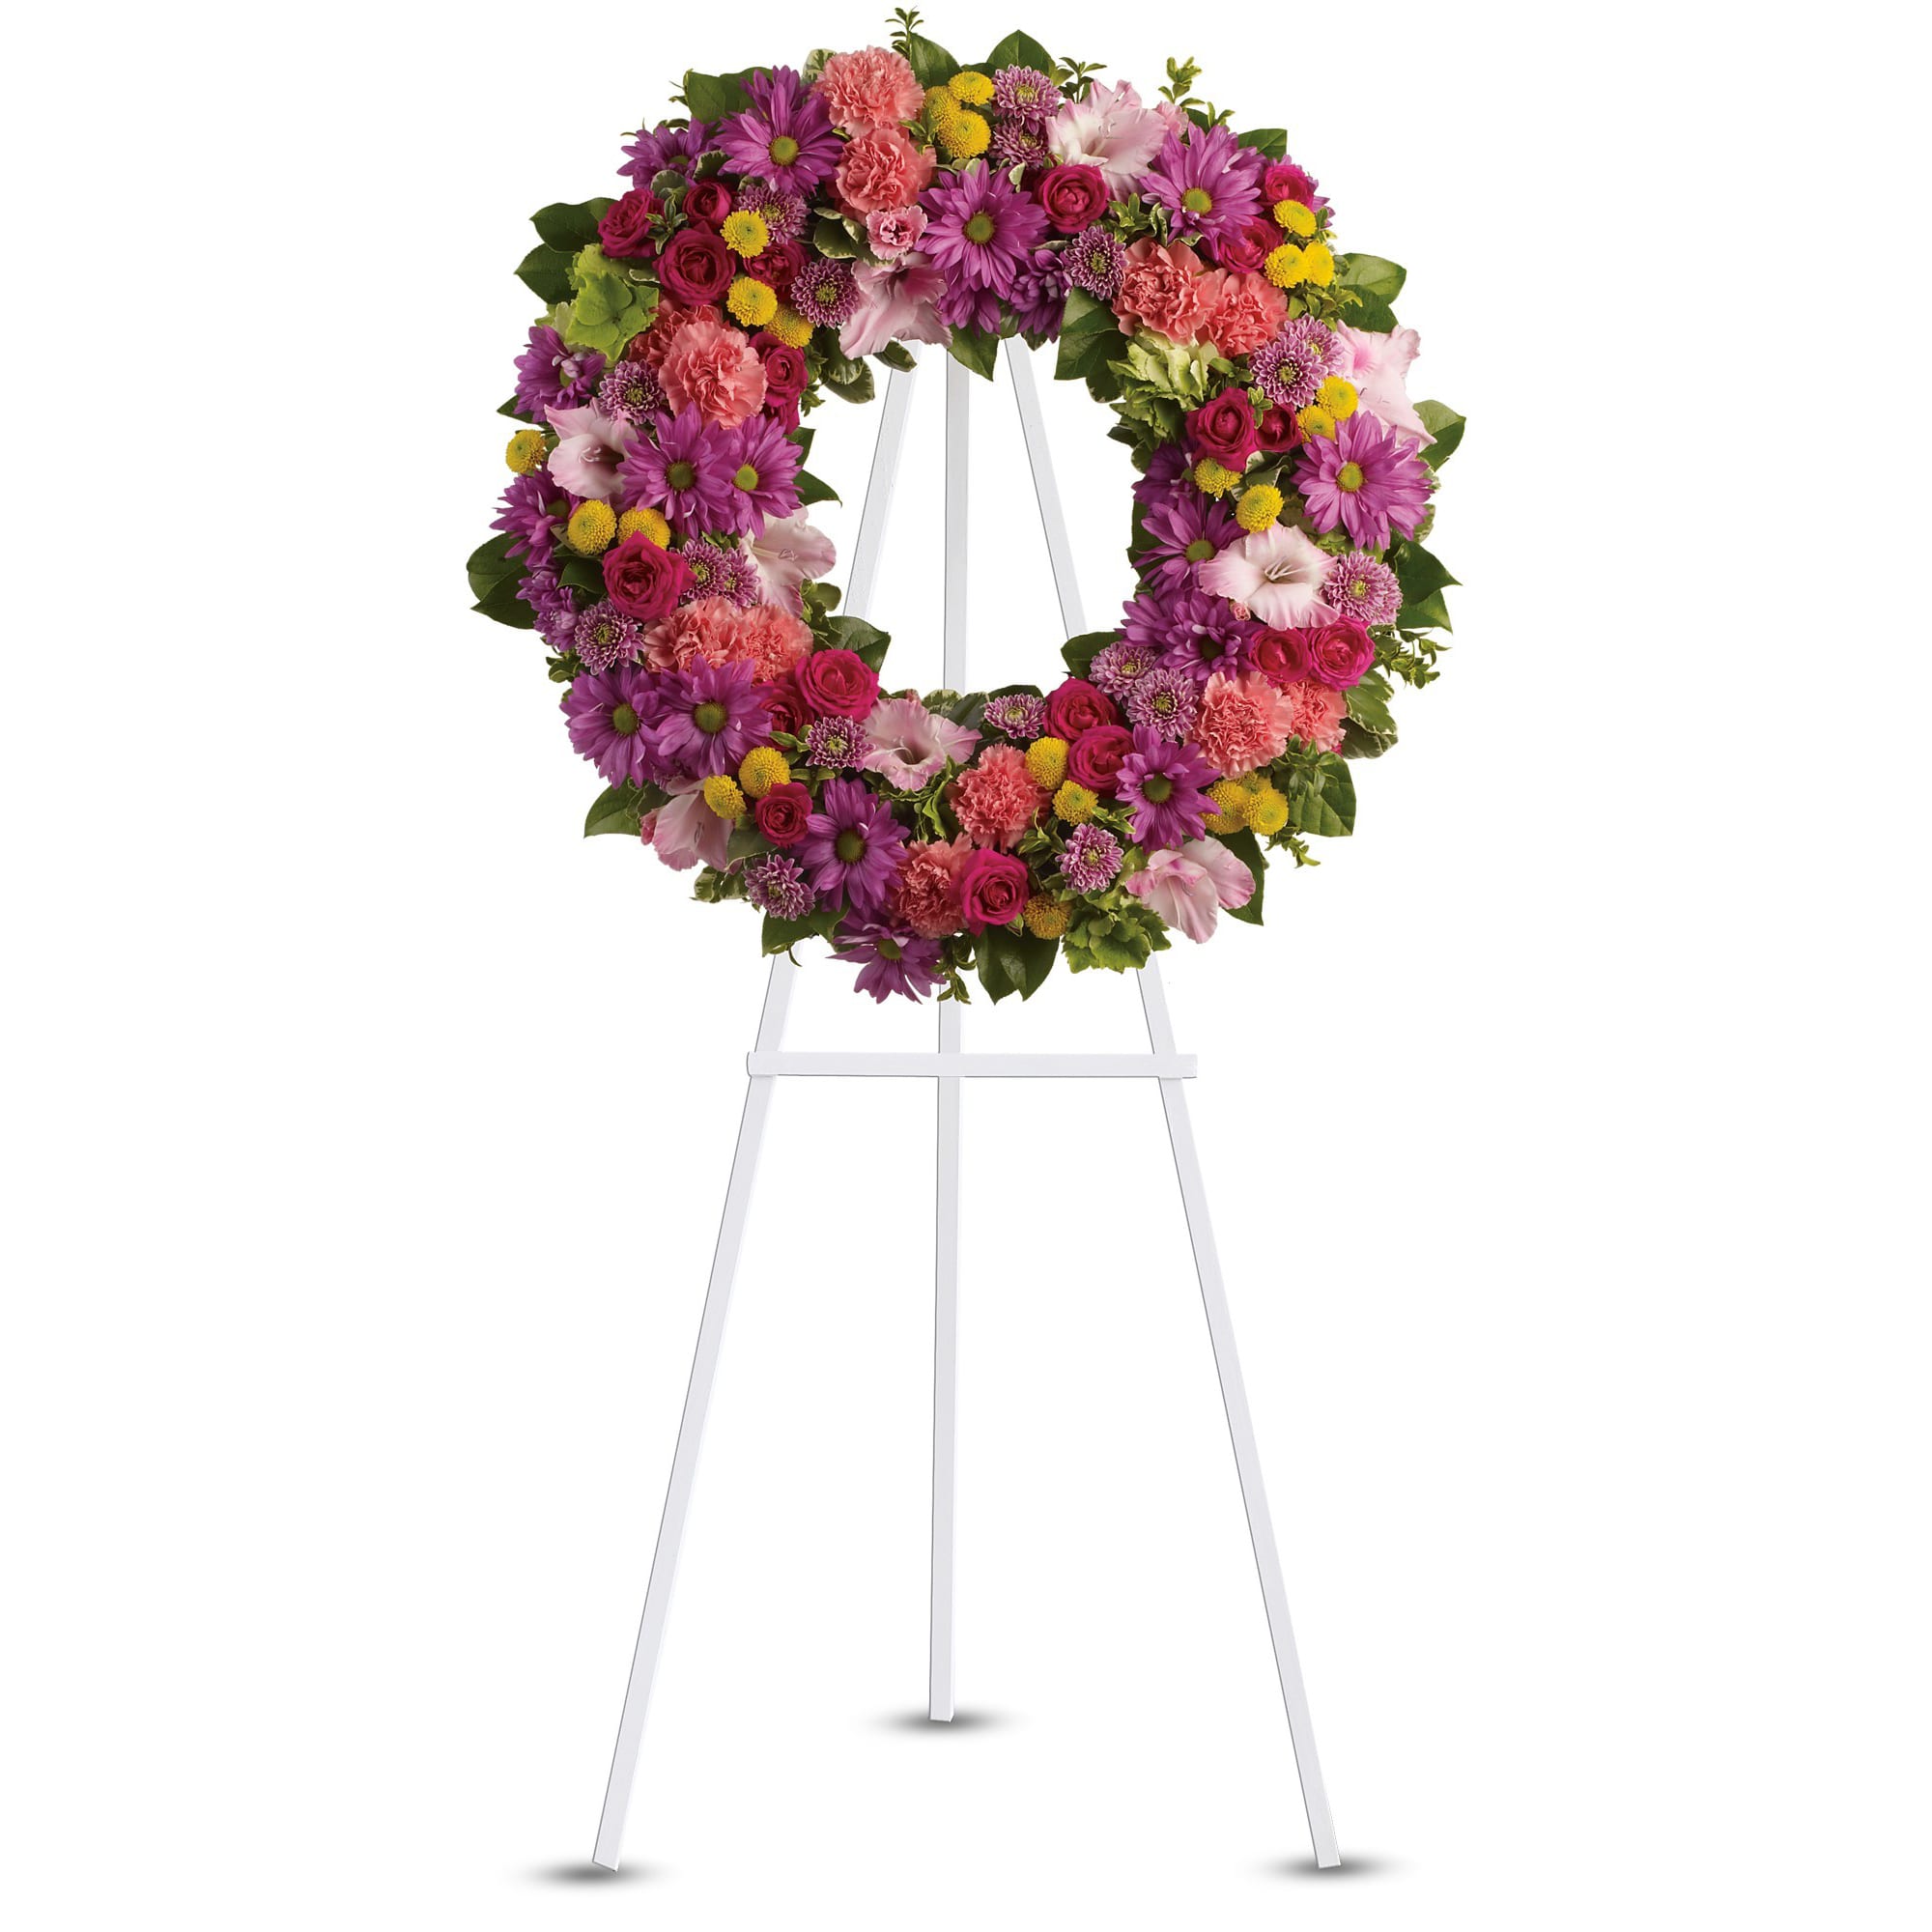 Ringed by Love A138 - The memory of brighter days is always a comfort to those in mourning. This lovely wreath will display your compassion beautifully. 